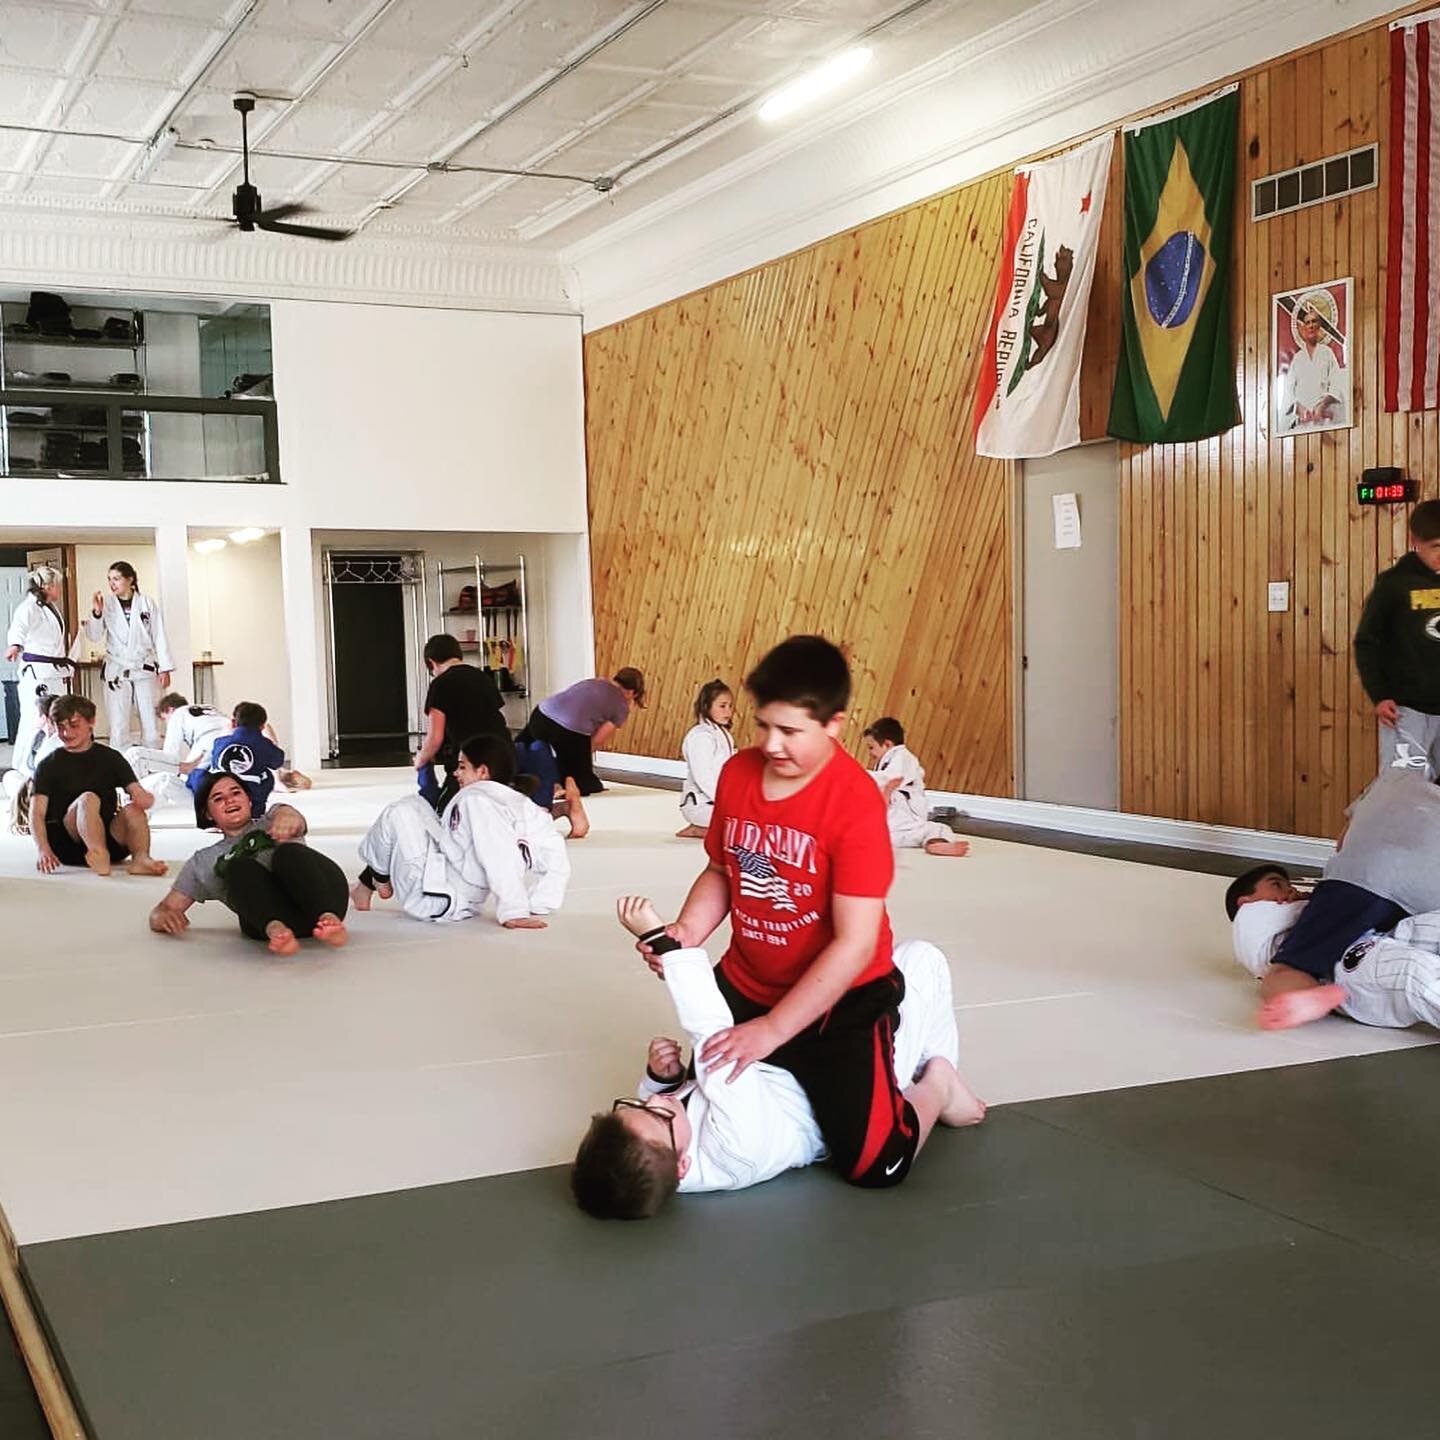 Last night was &ldquo;Bring a Friend to Jiujitsu Night!&rdquo; The kids (and adults) brought friends in to class to introduce them to martial arts. We taught some basic tumbling plus some anti bullying techniques to keep kids safe at school or on the